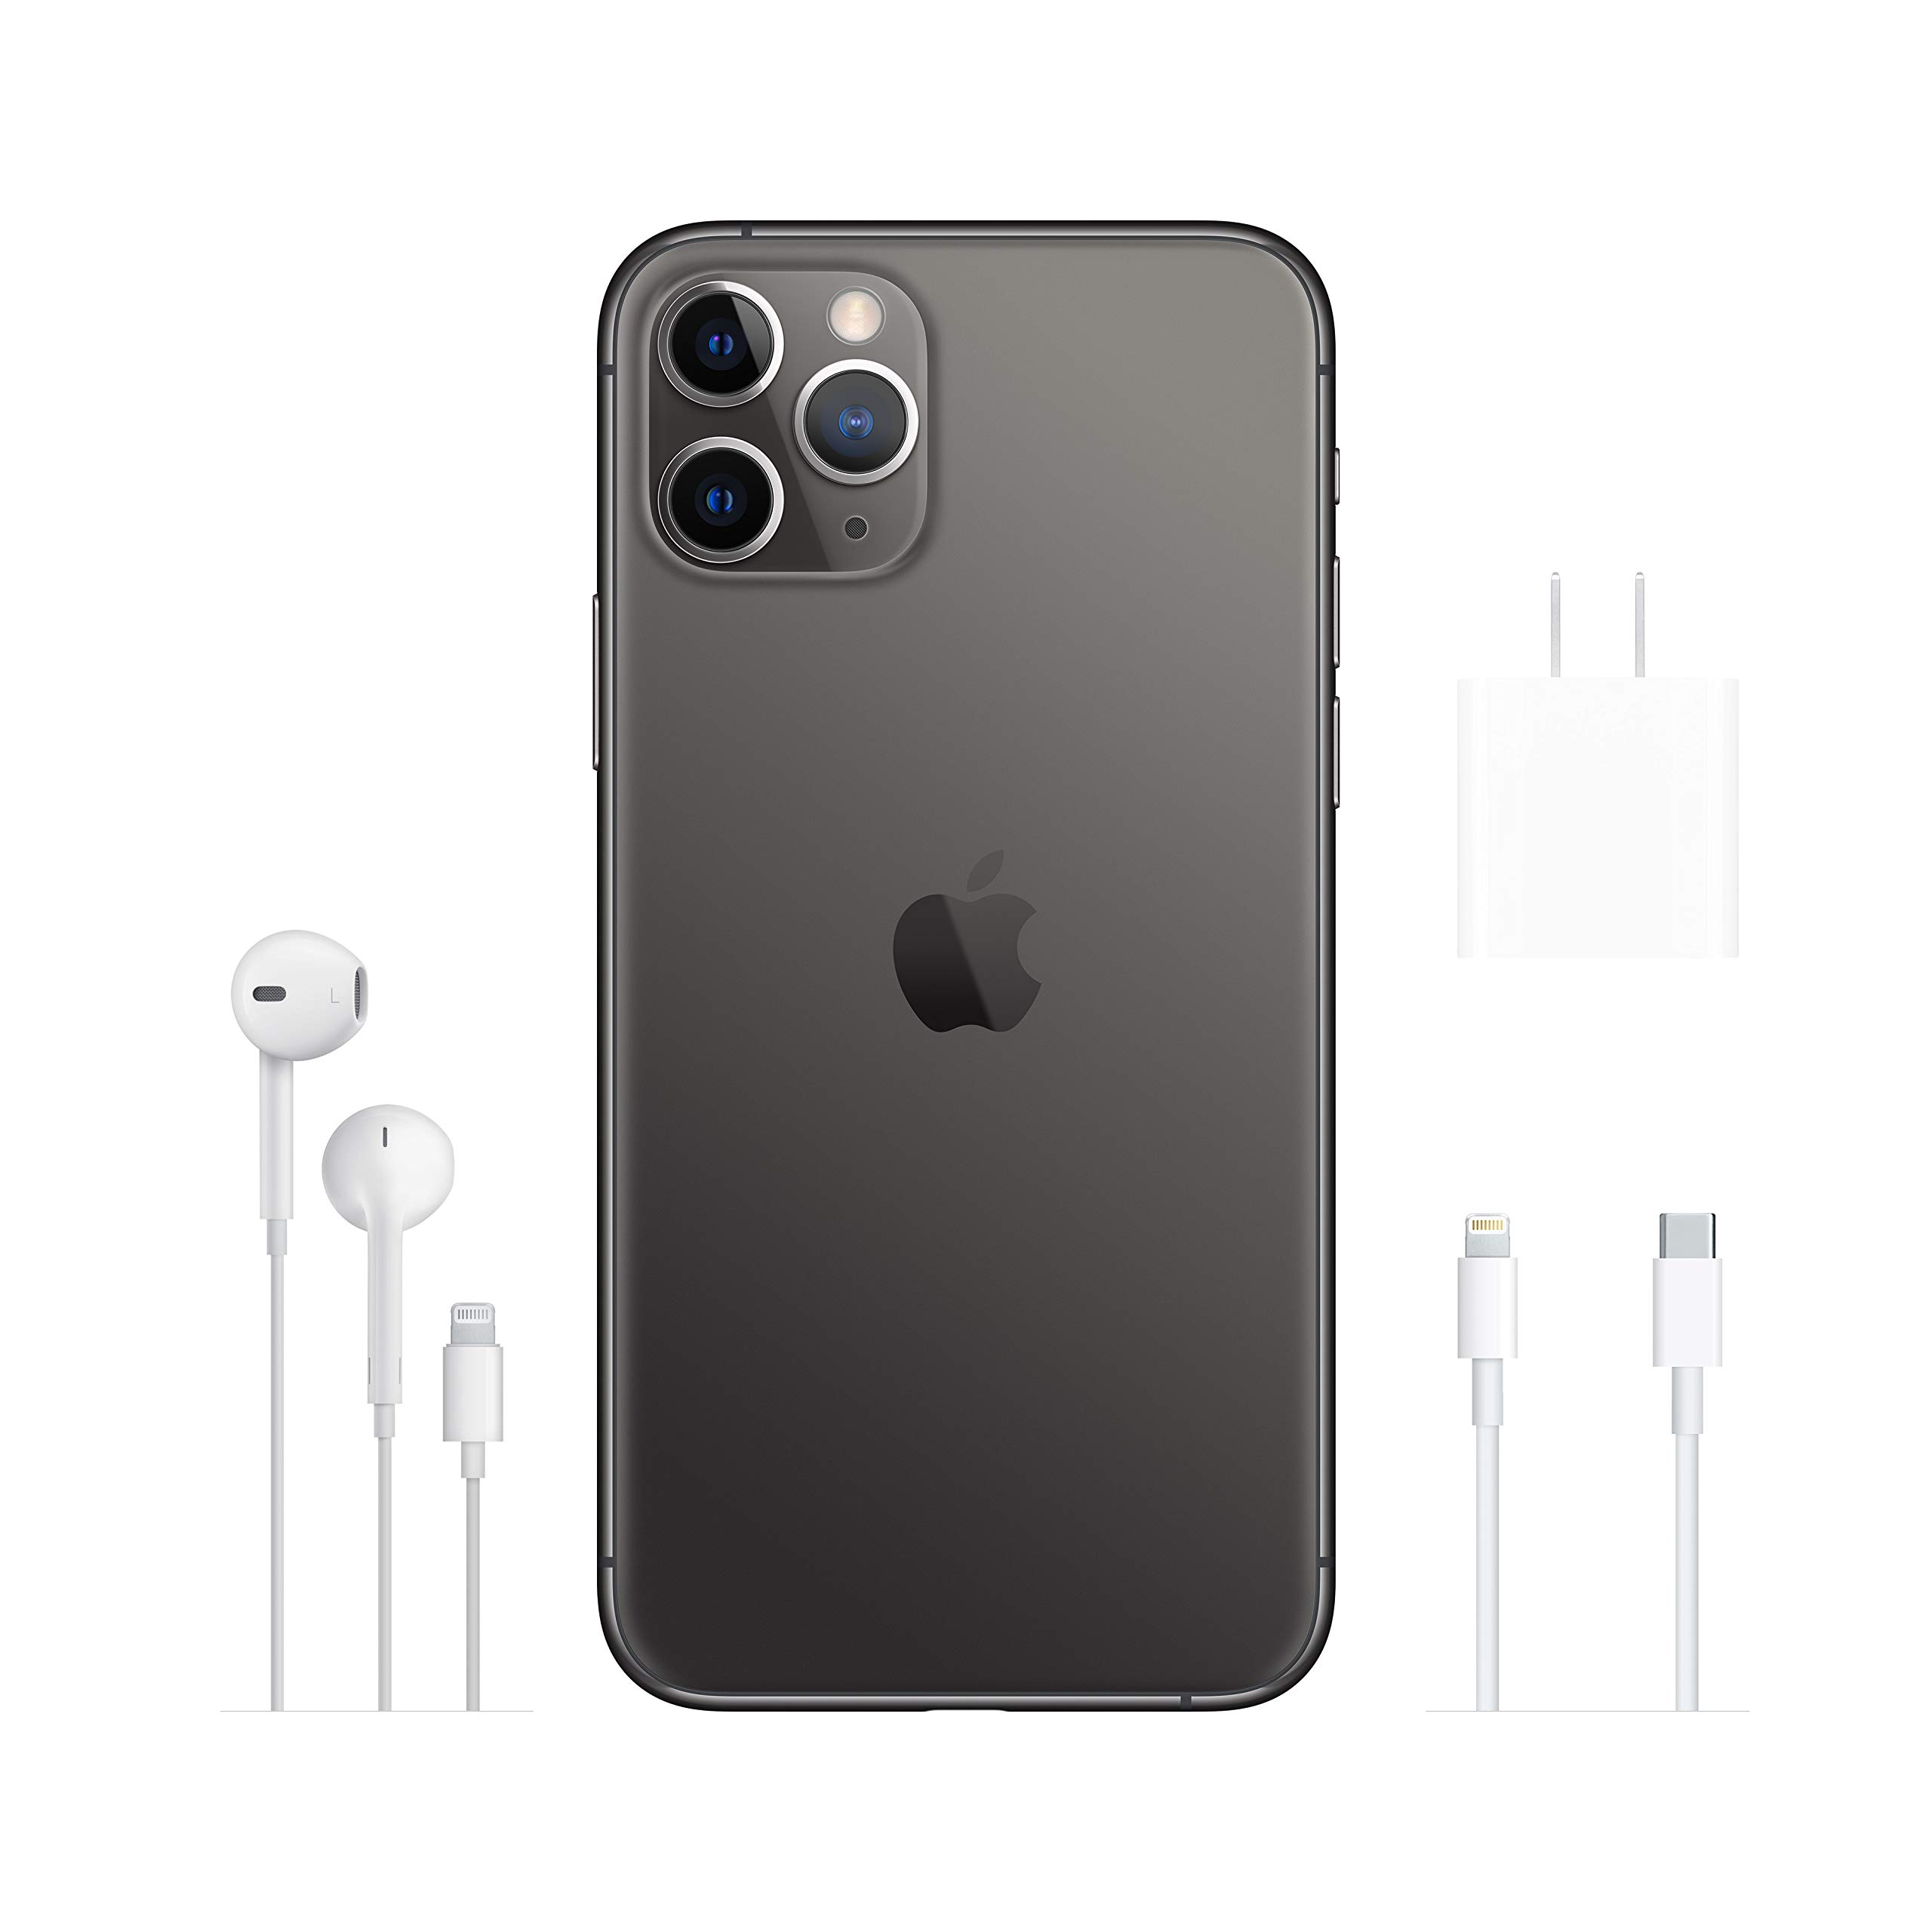 Apple iPhone 11 Pro [512GB, Space Gray] + Carrier Subscription [Cricket Wireless]